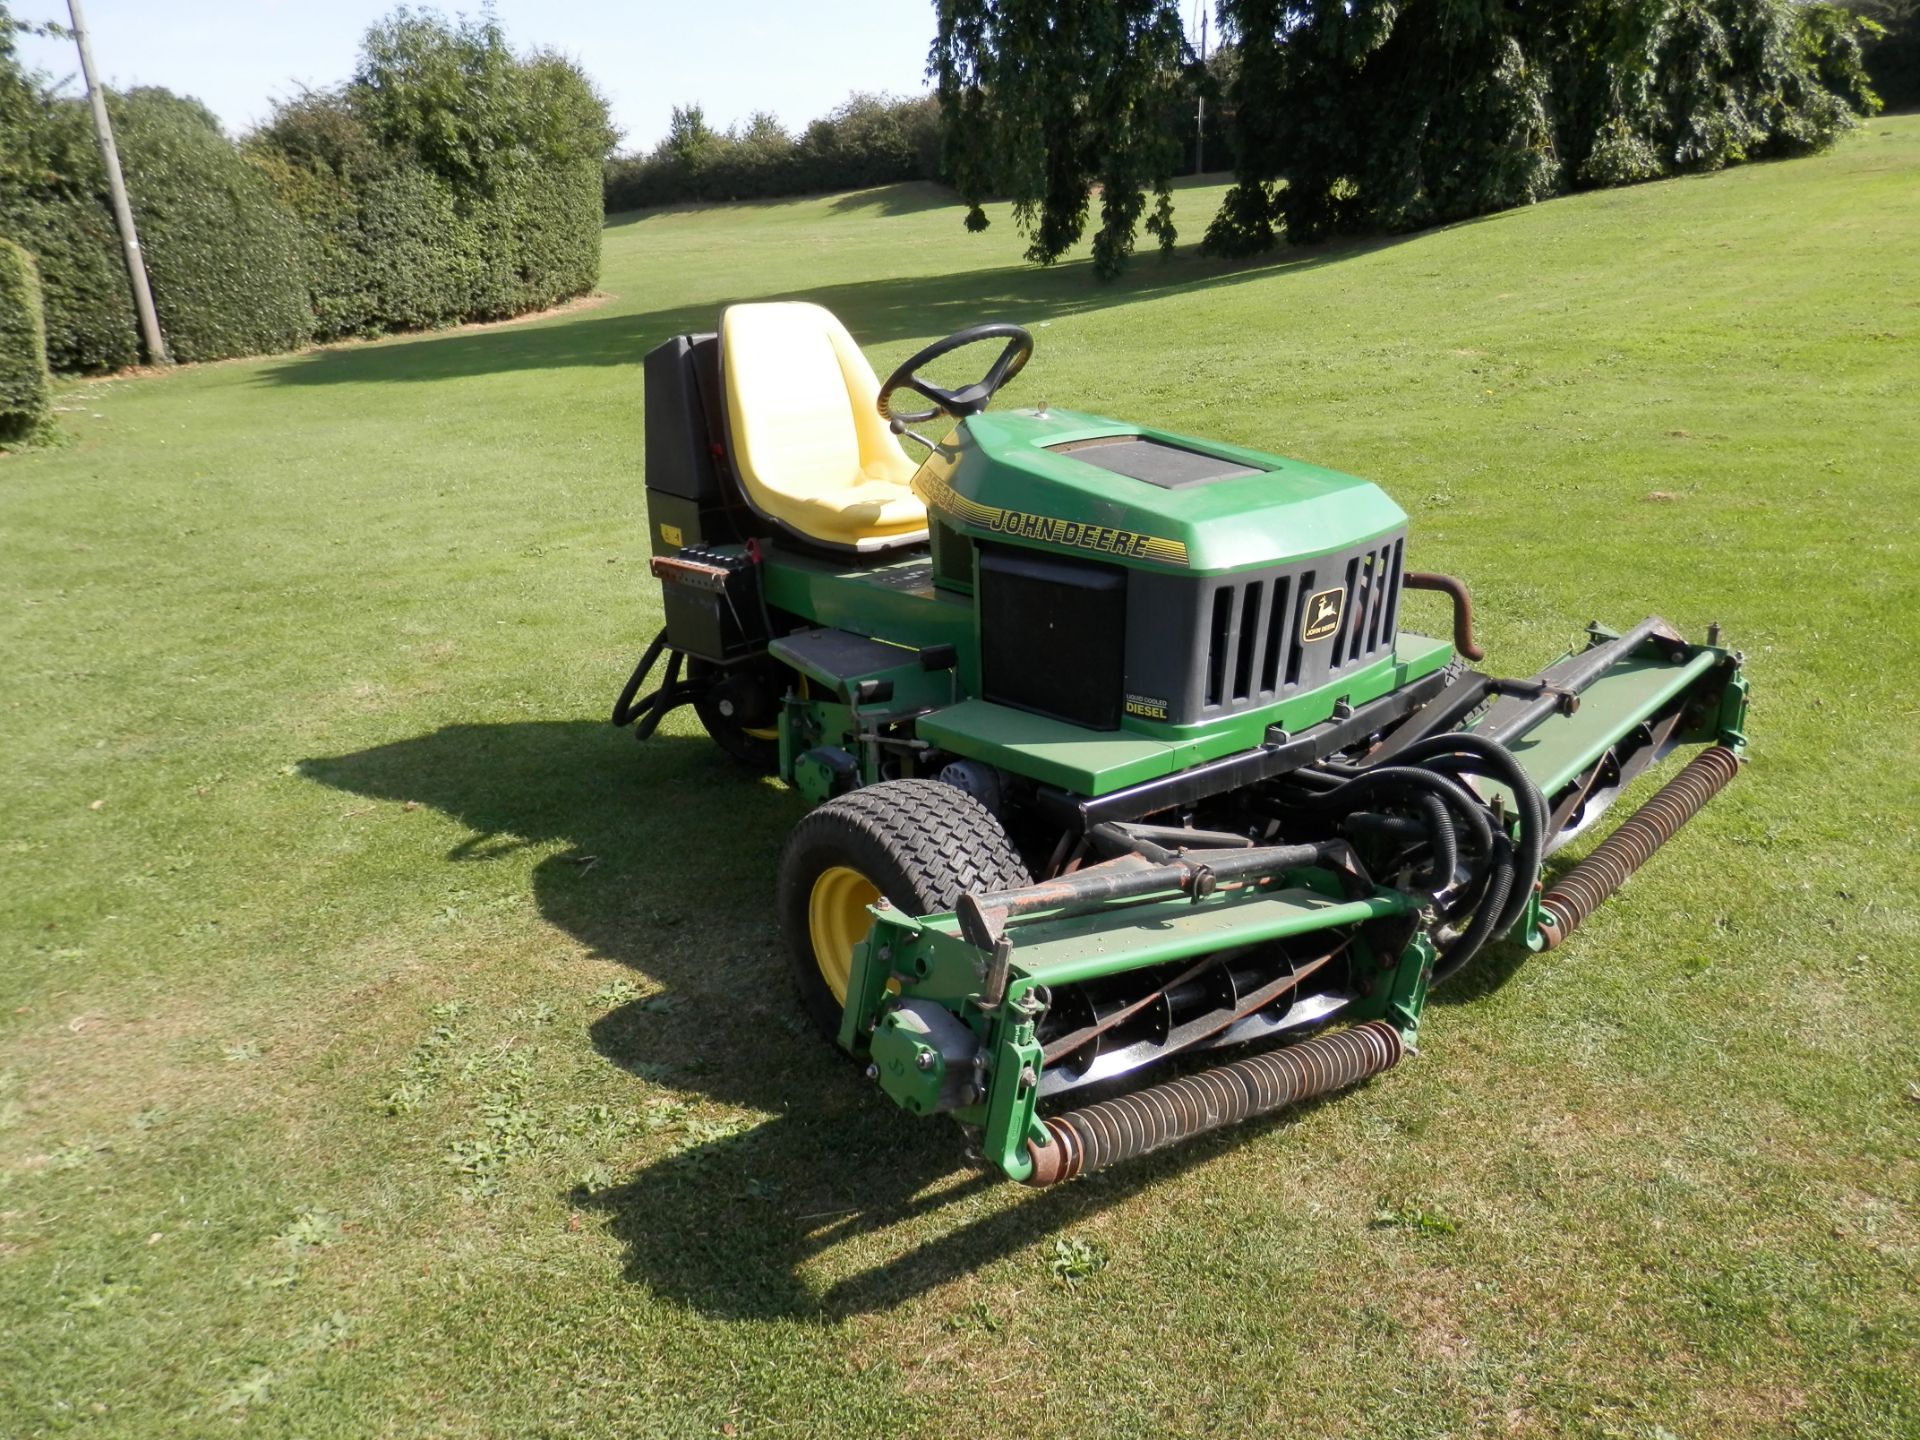 1996 JOHN DEERE 2653A RIDE ON GANG MOWER,CHECKED & WORKING. WIDE CUT, IDEAL FOR ESTATES/GOLF COURSES - Image 6 of 11